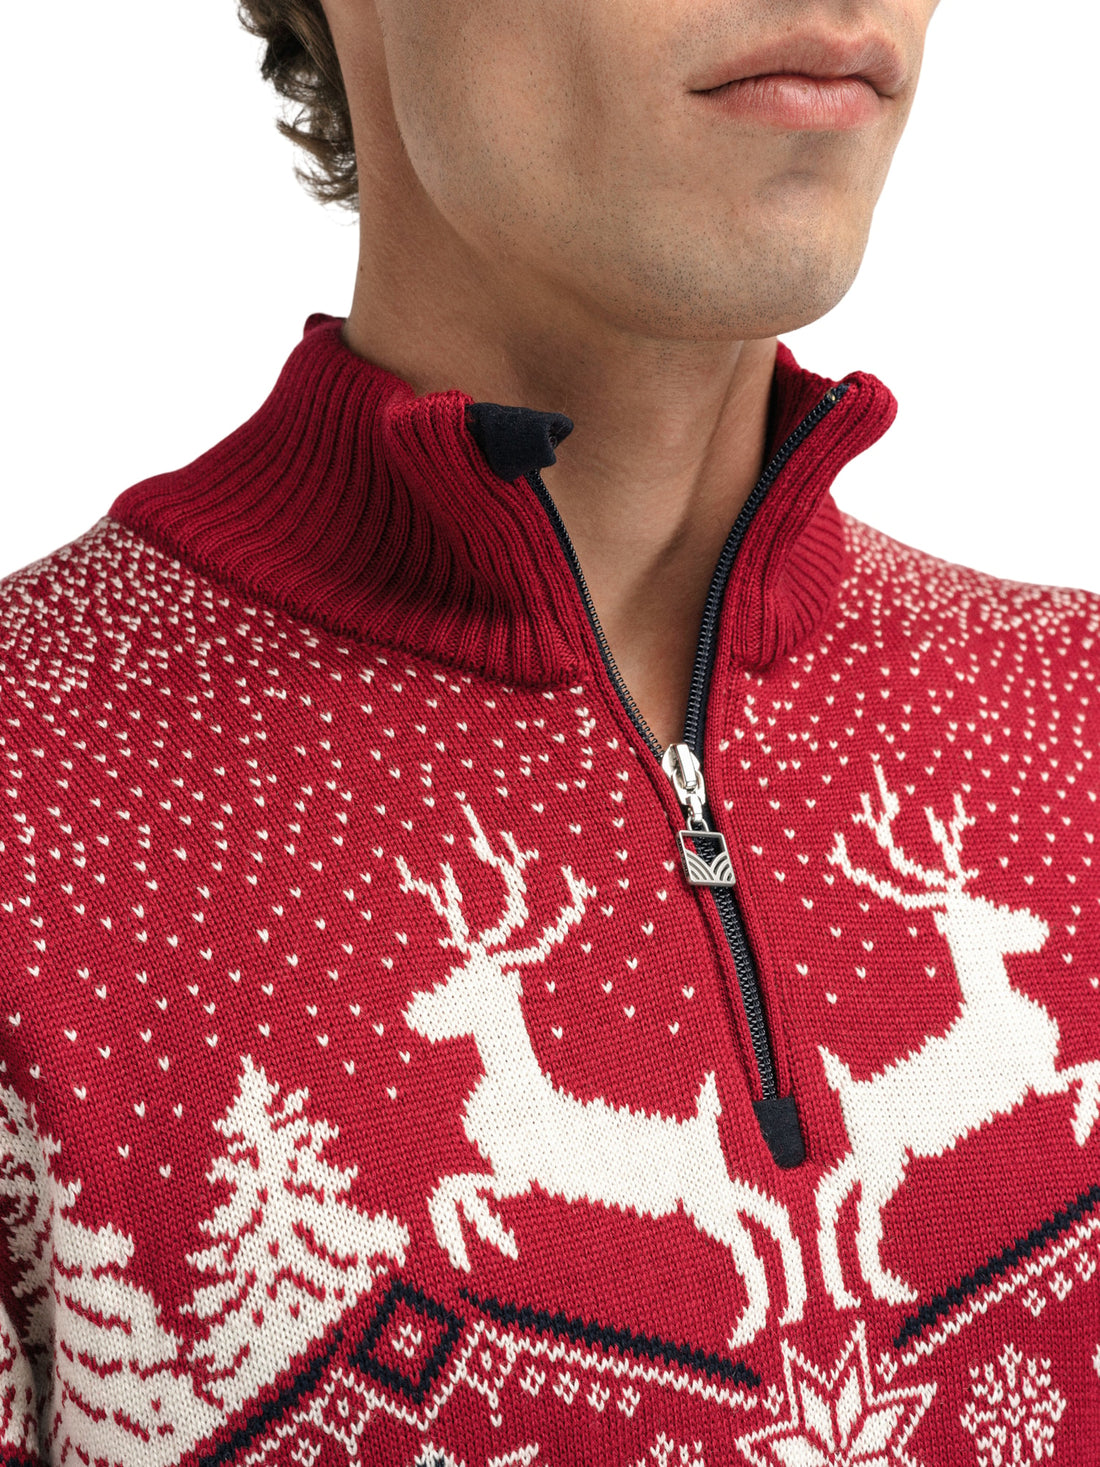 Dale of Norway - Christmas Men's Sweater - Red